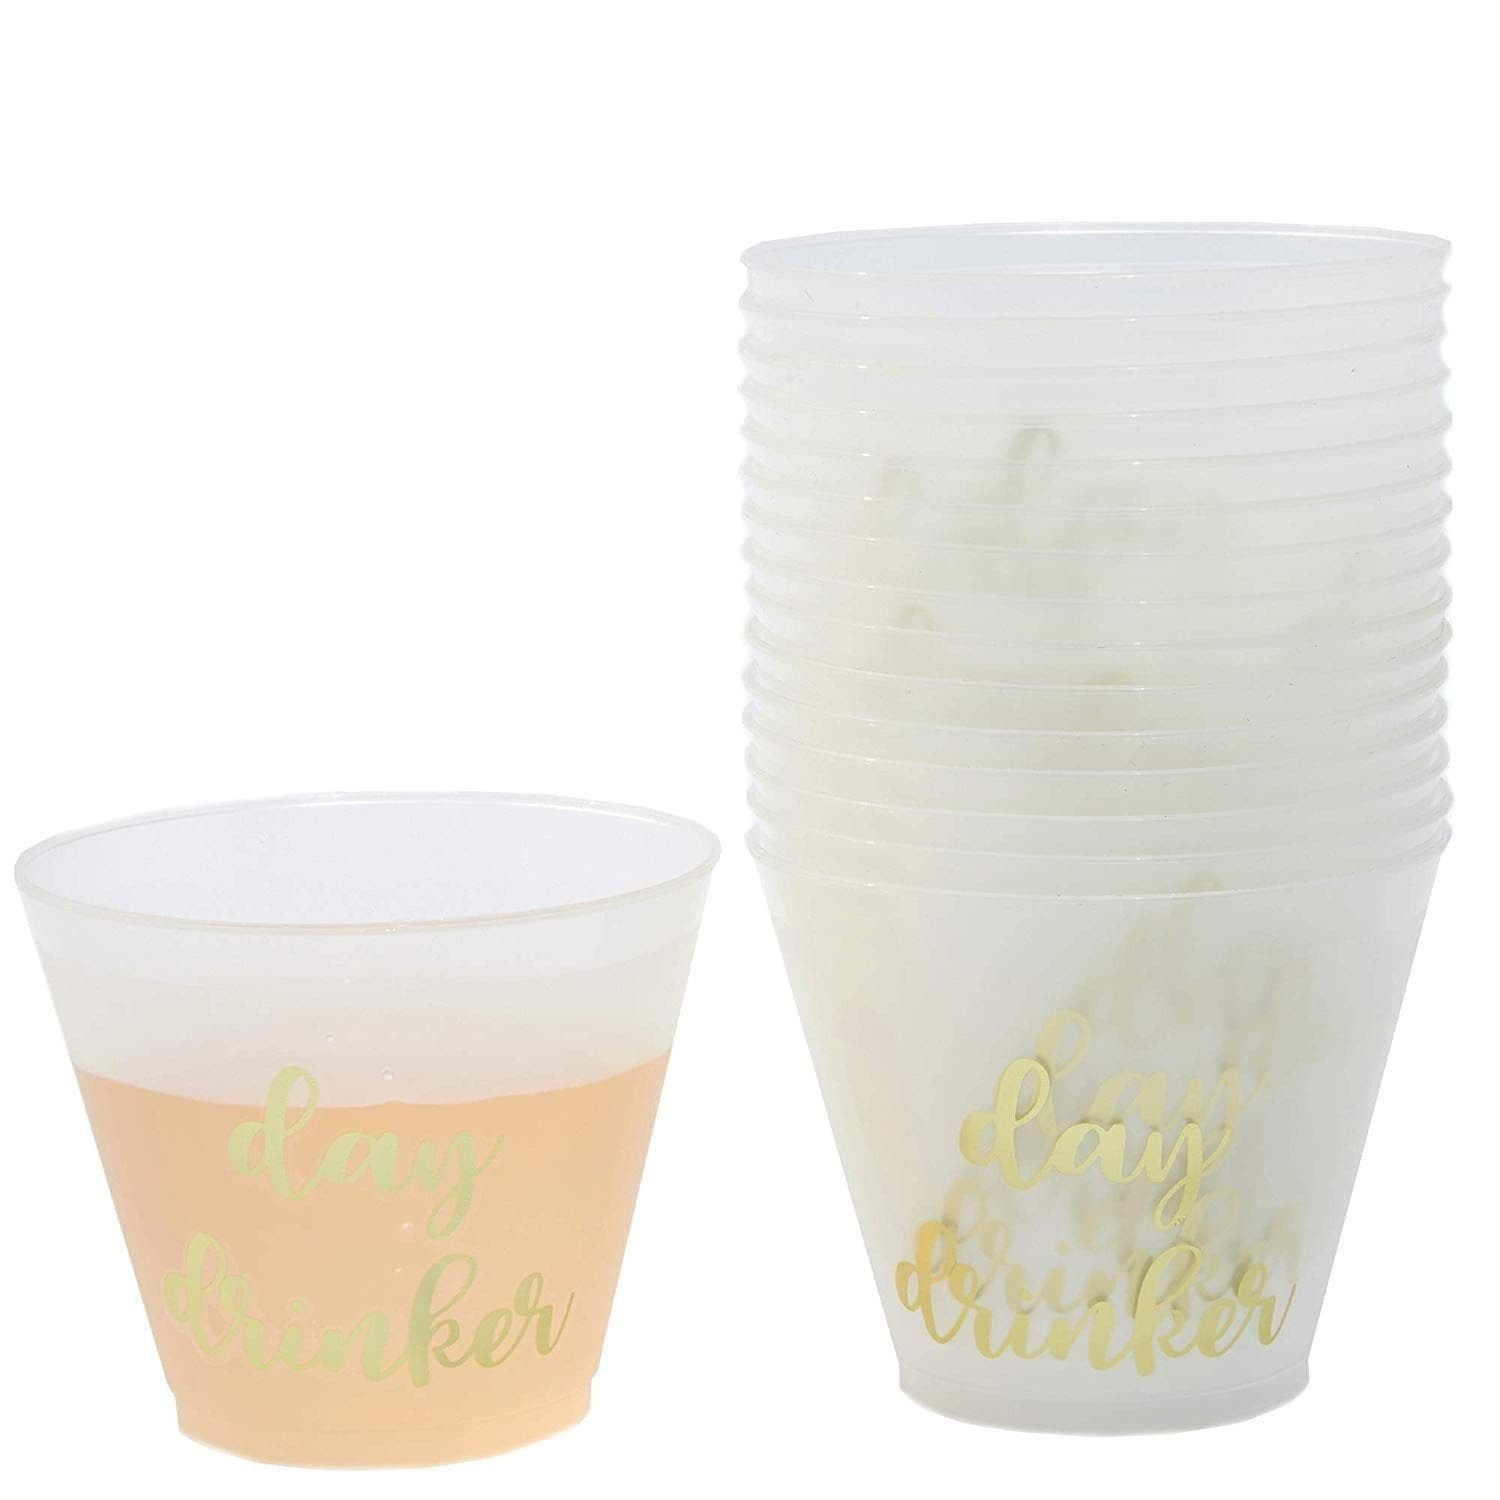 9 Oz Translucent Plastic Cups Disposable Drinkware for Parties